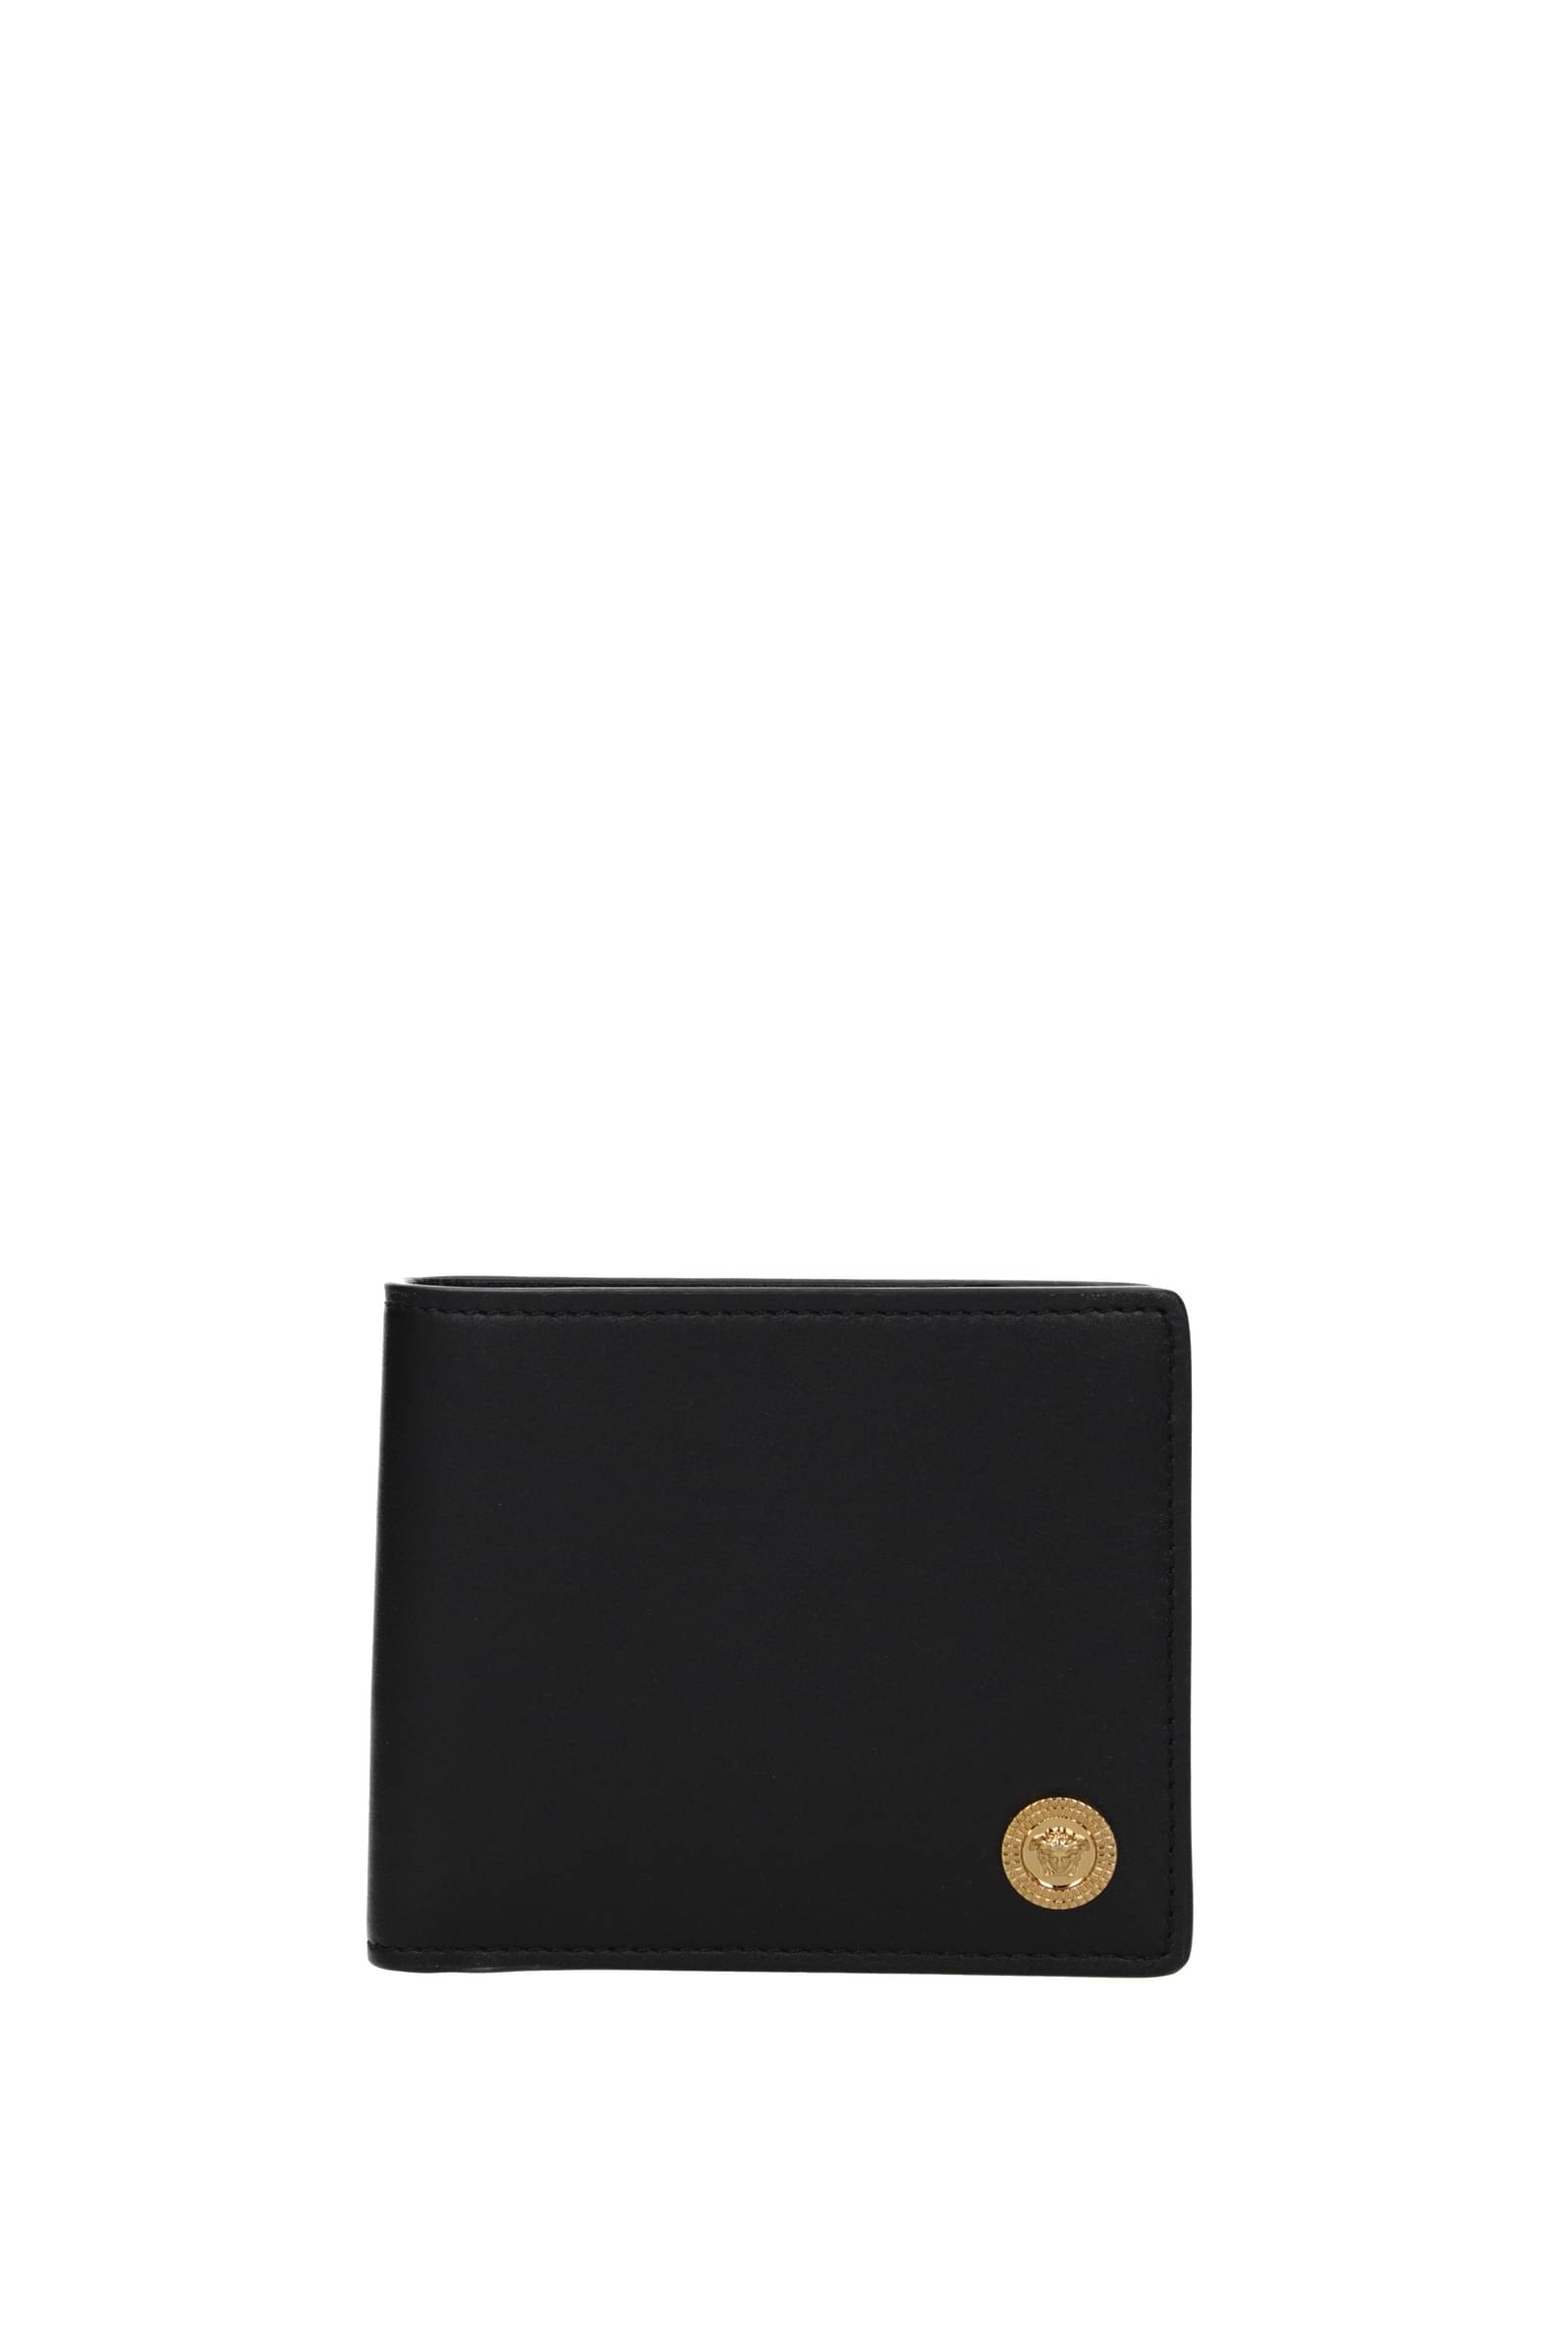 Versace Bags for Men - Shop Now on FARFETCH